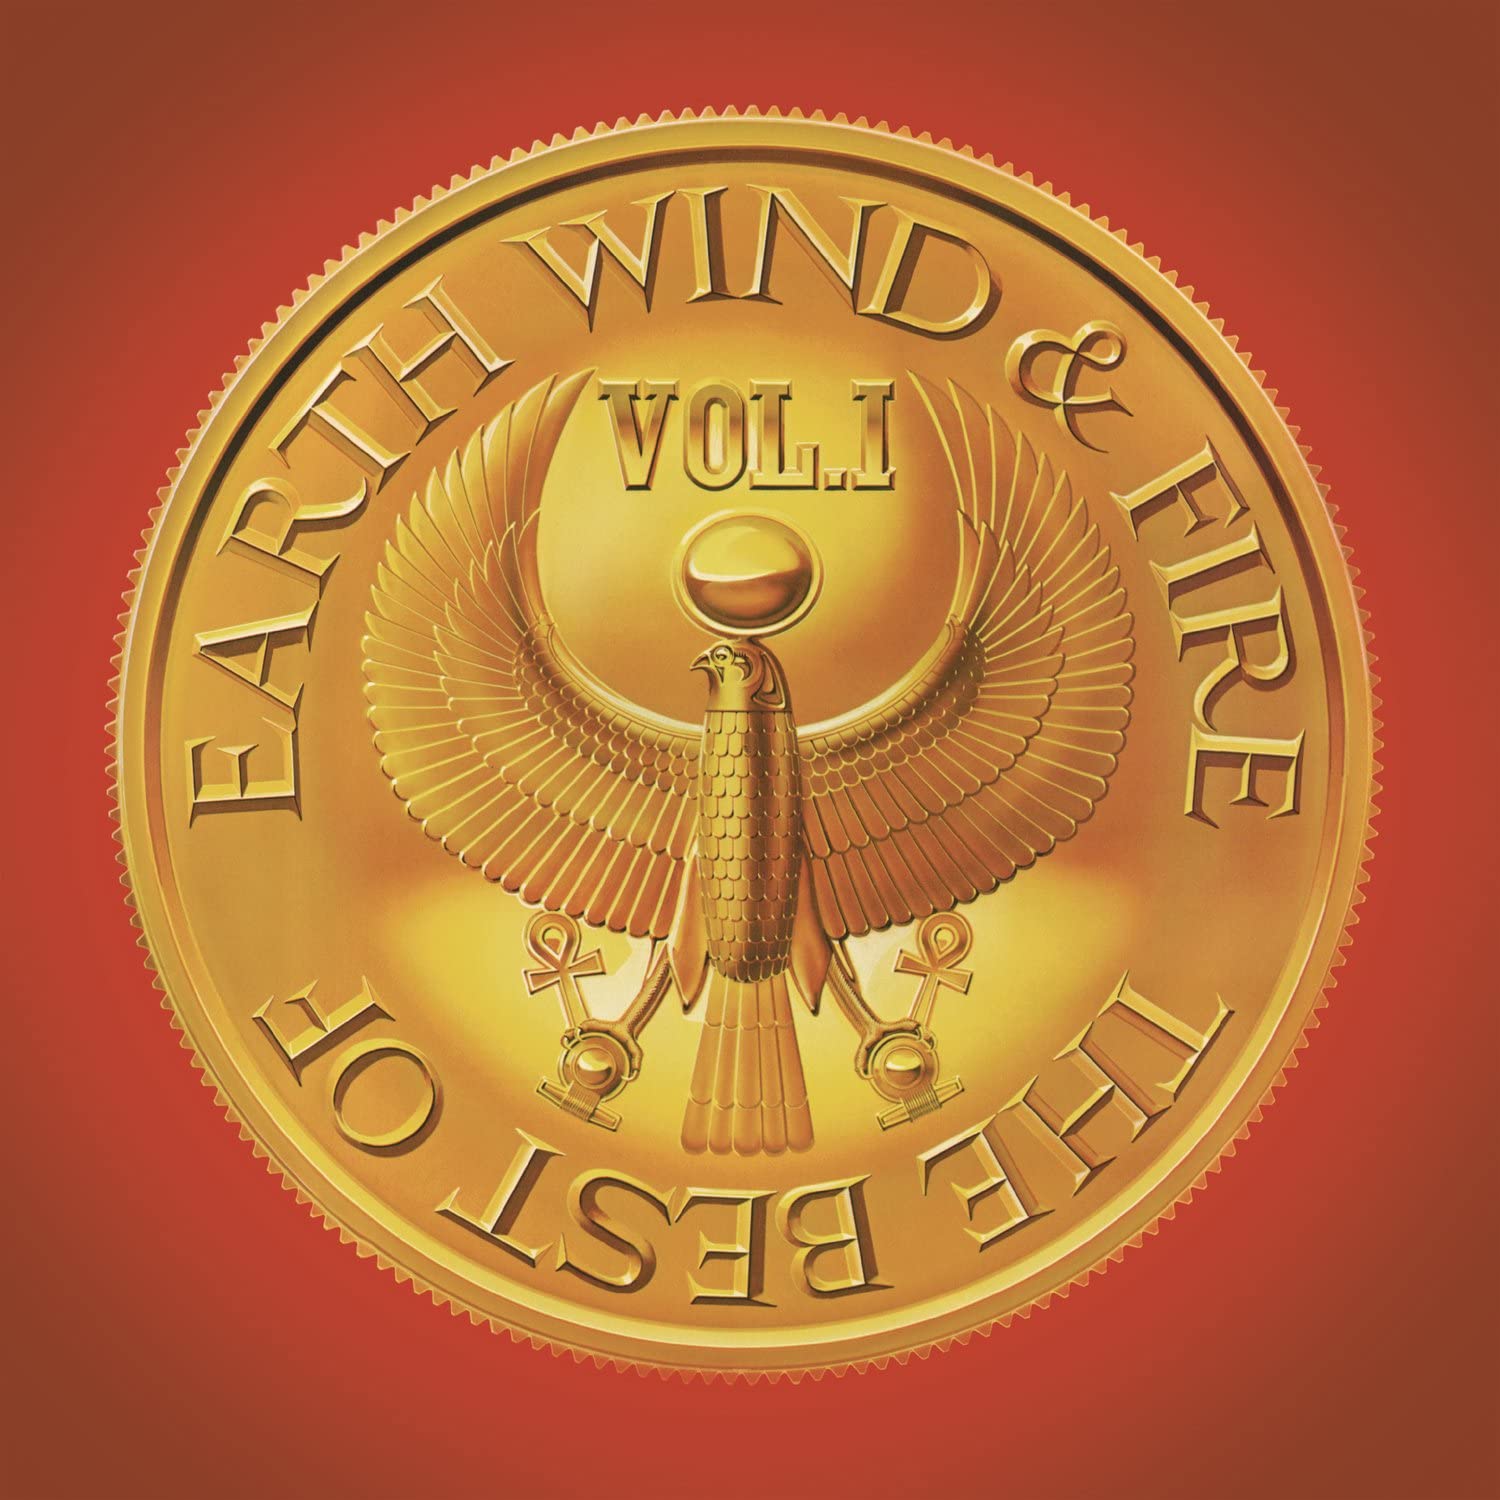 The first volume of Greatest Hits on Vinyl from Earth, Wind and Fire.